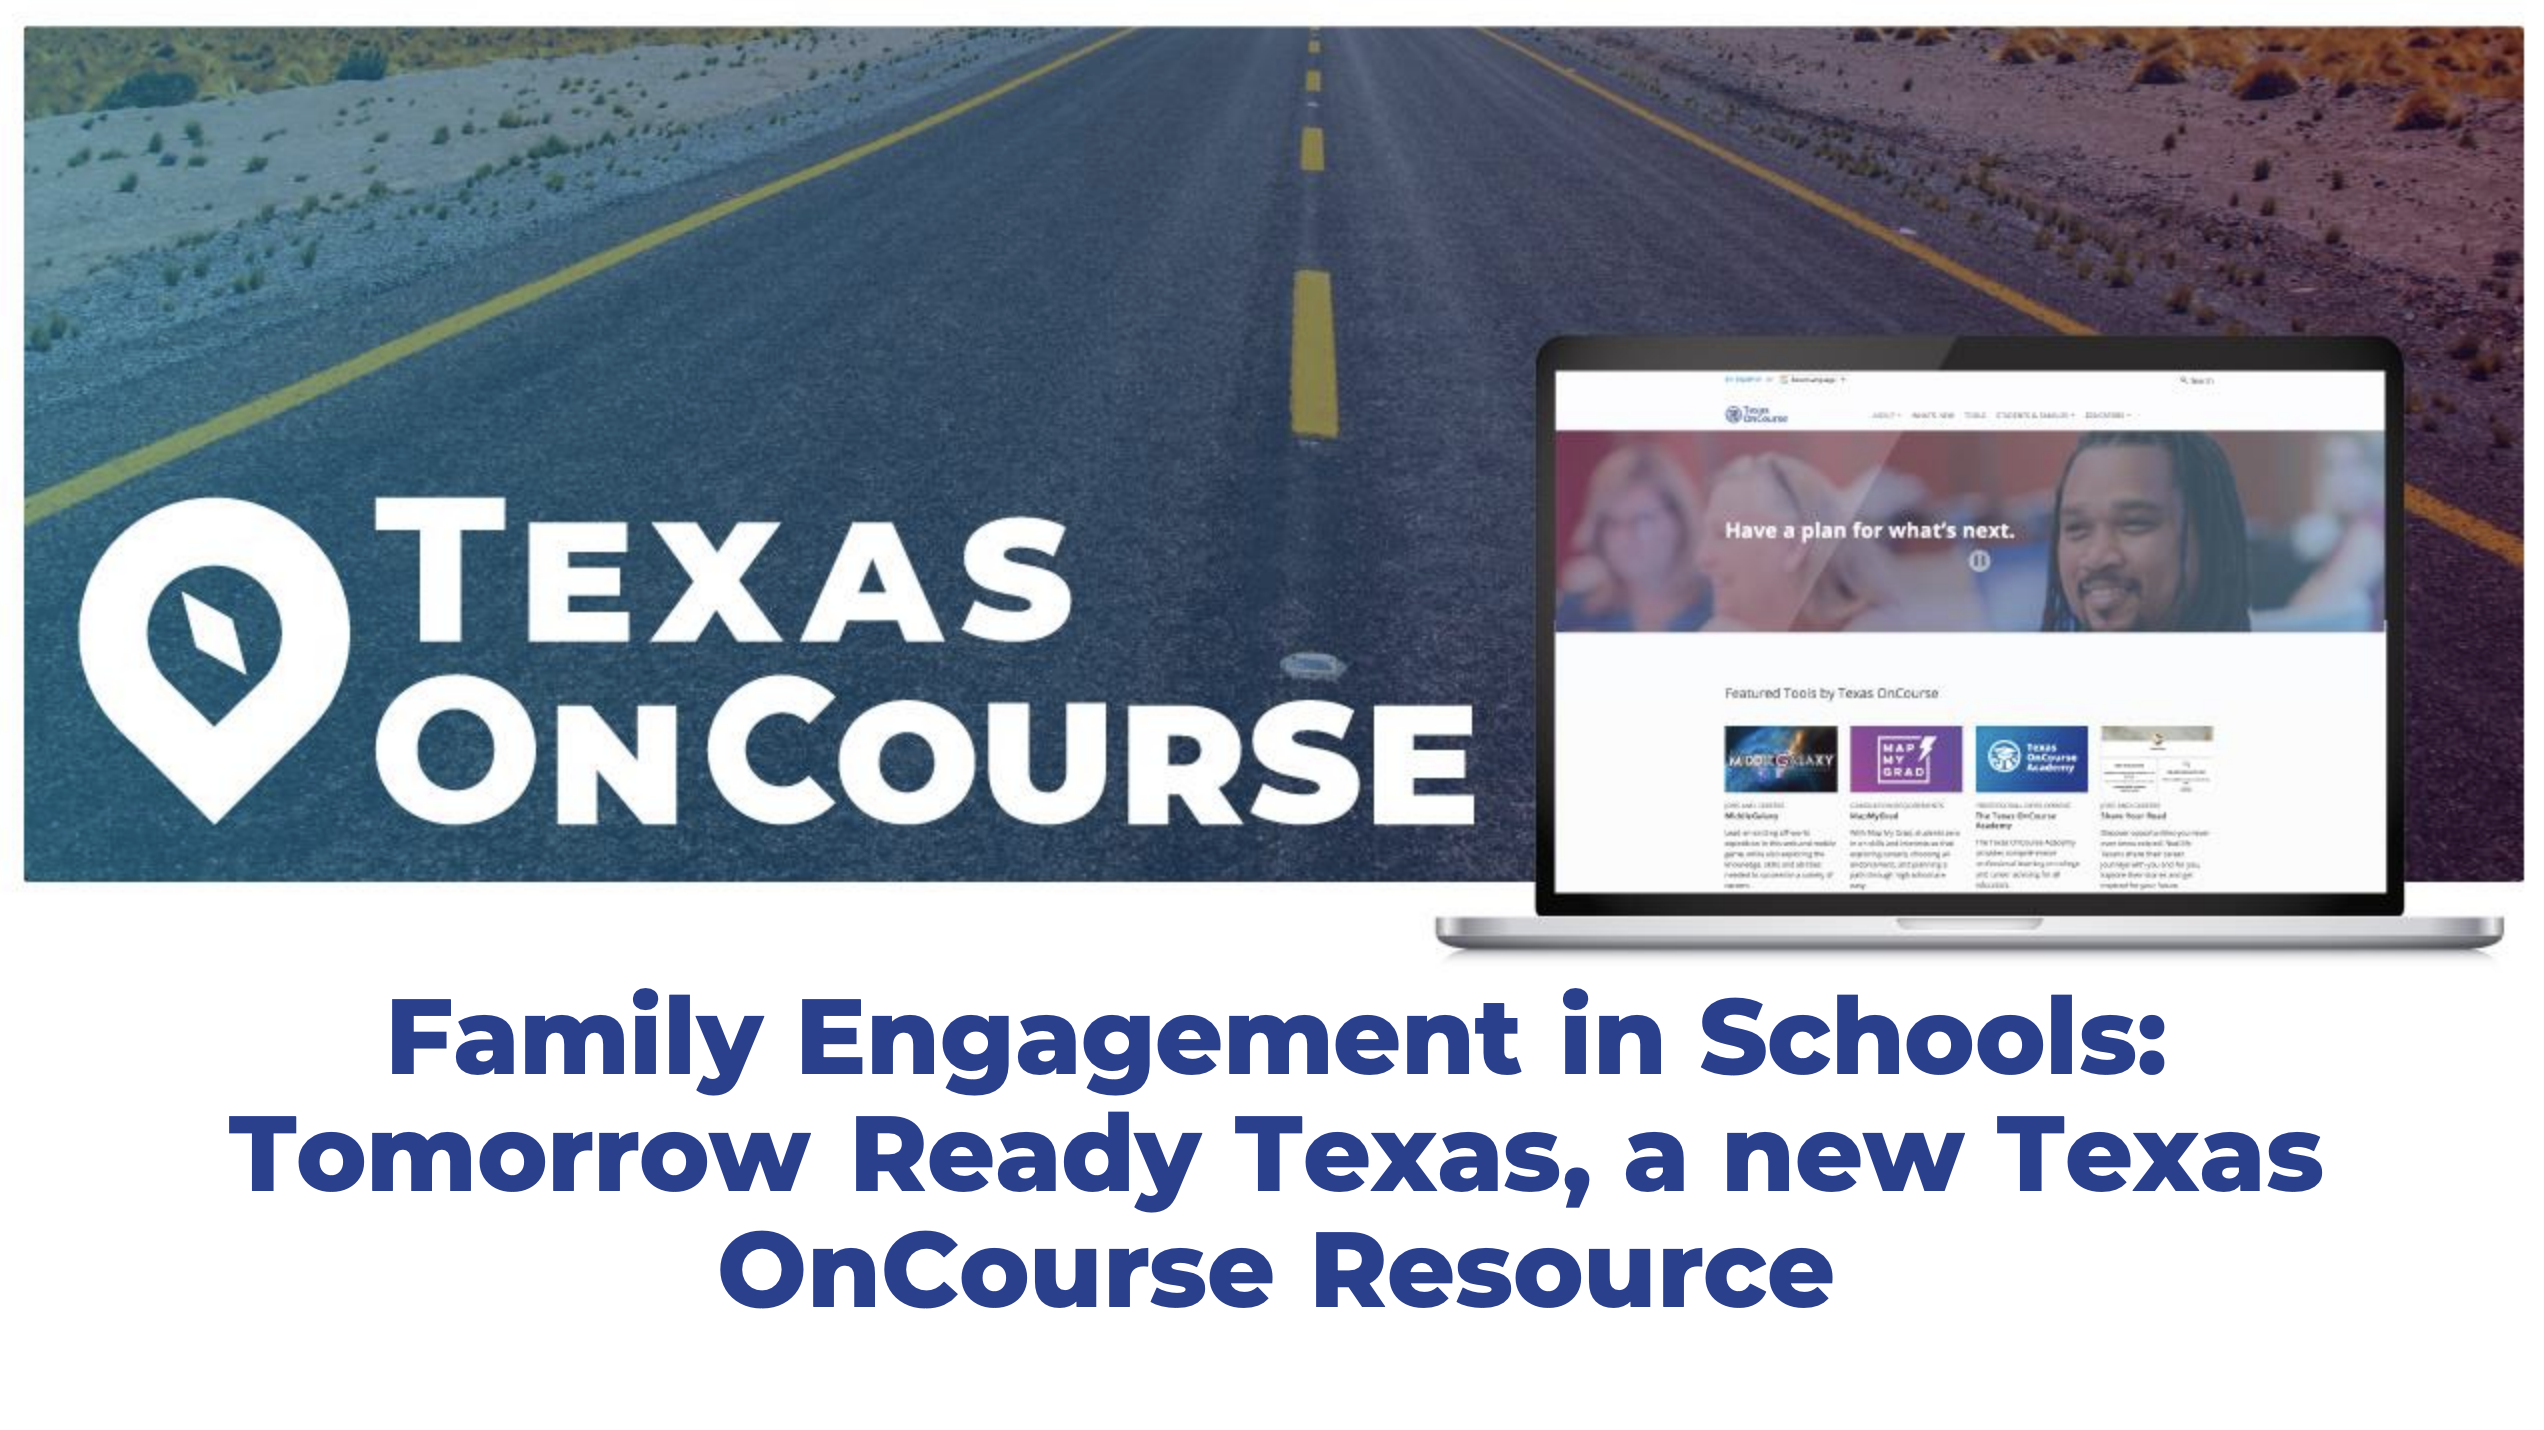 Webinar on Family Engagement in Schools and introducing Tomorrow Ready Texas